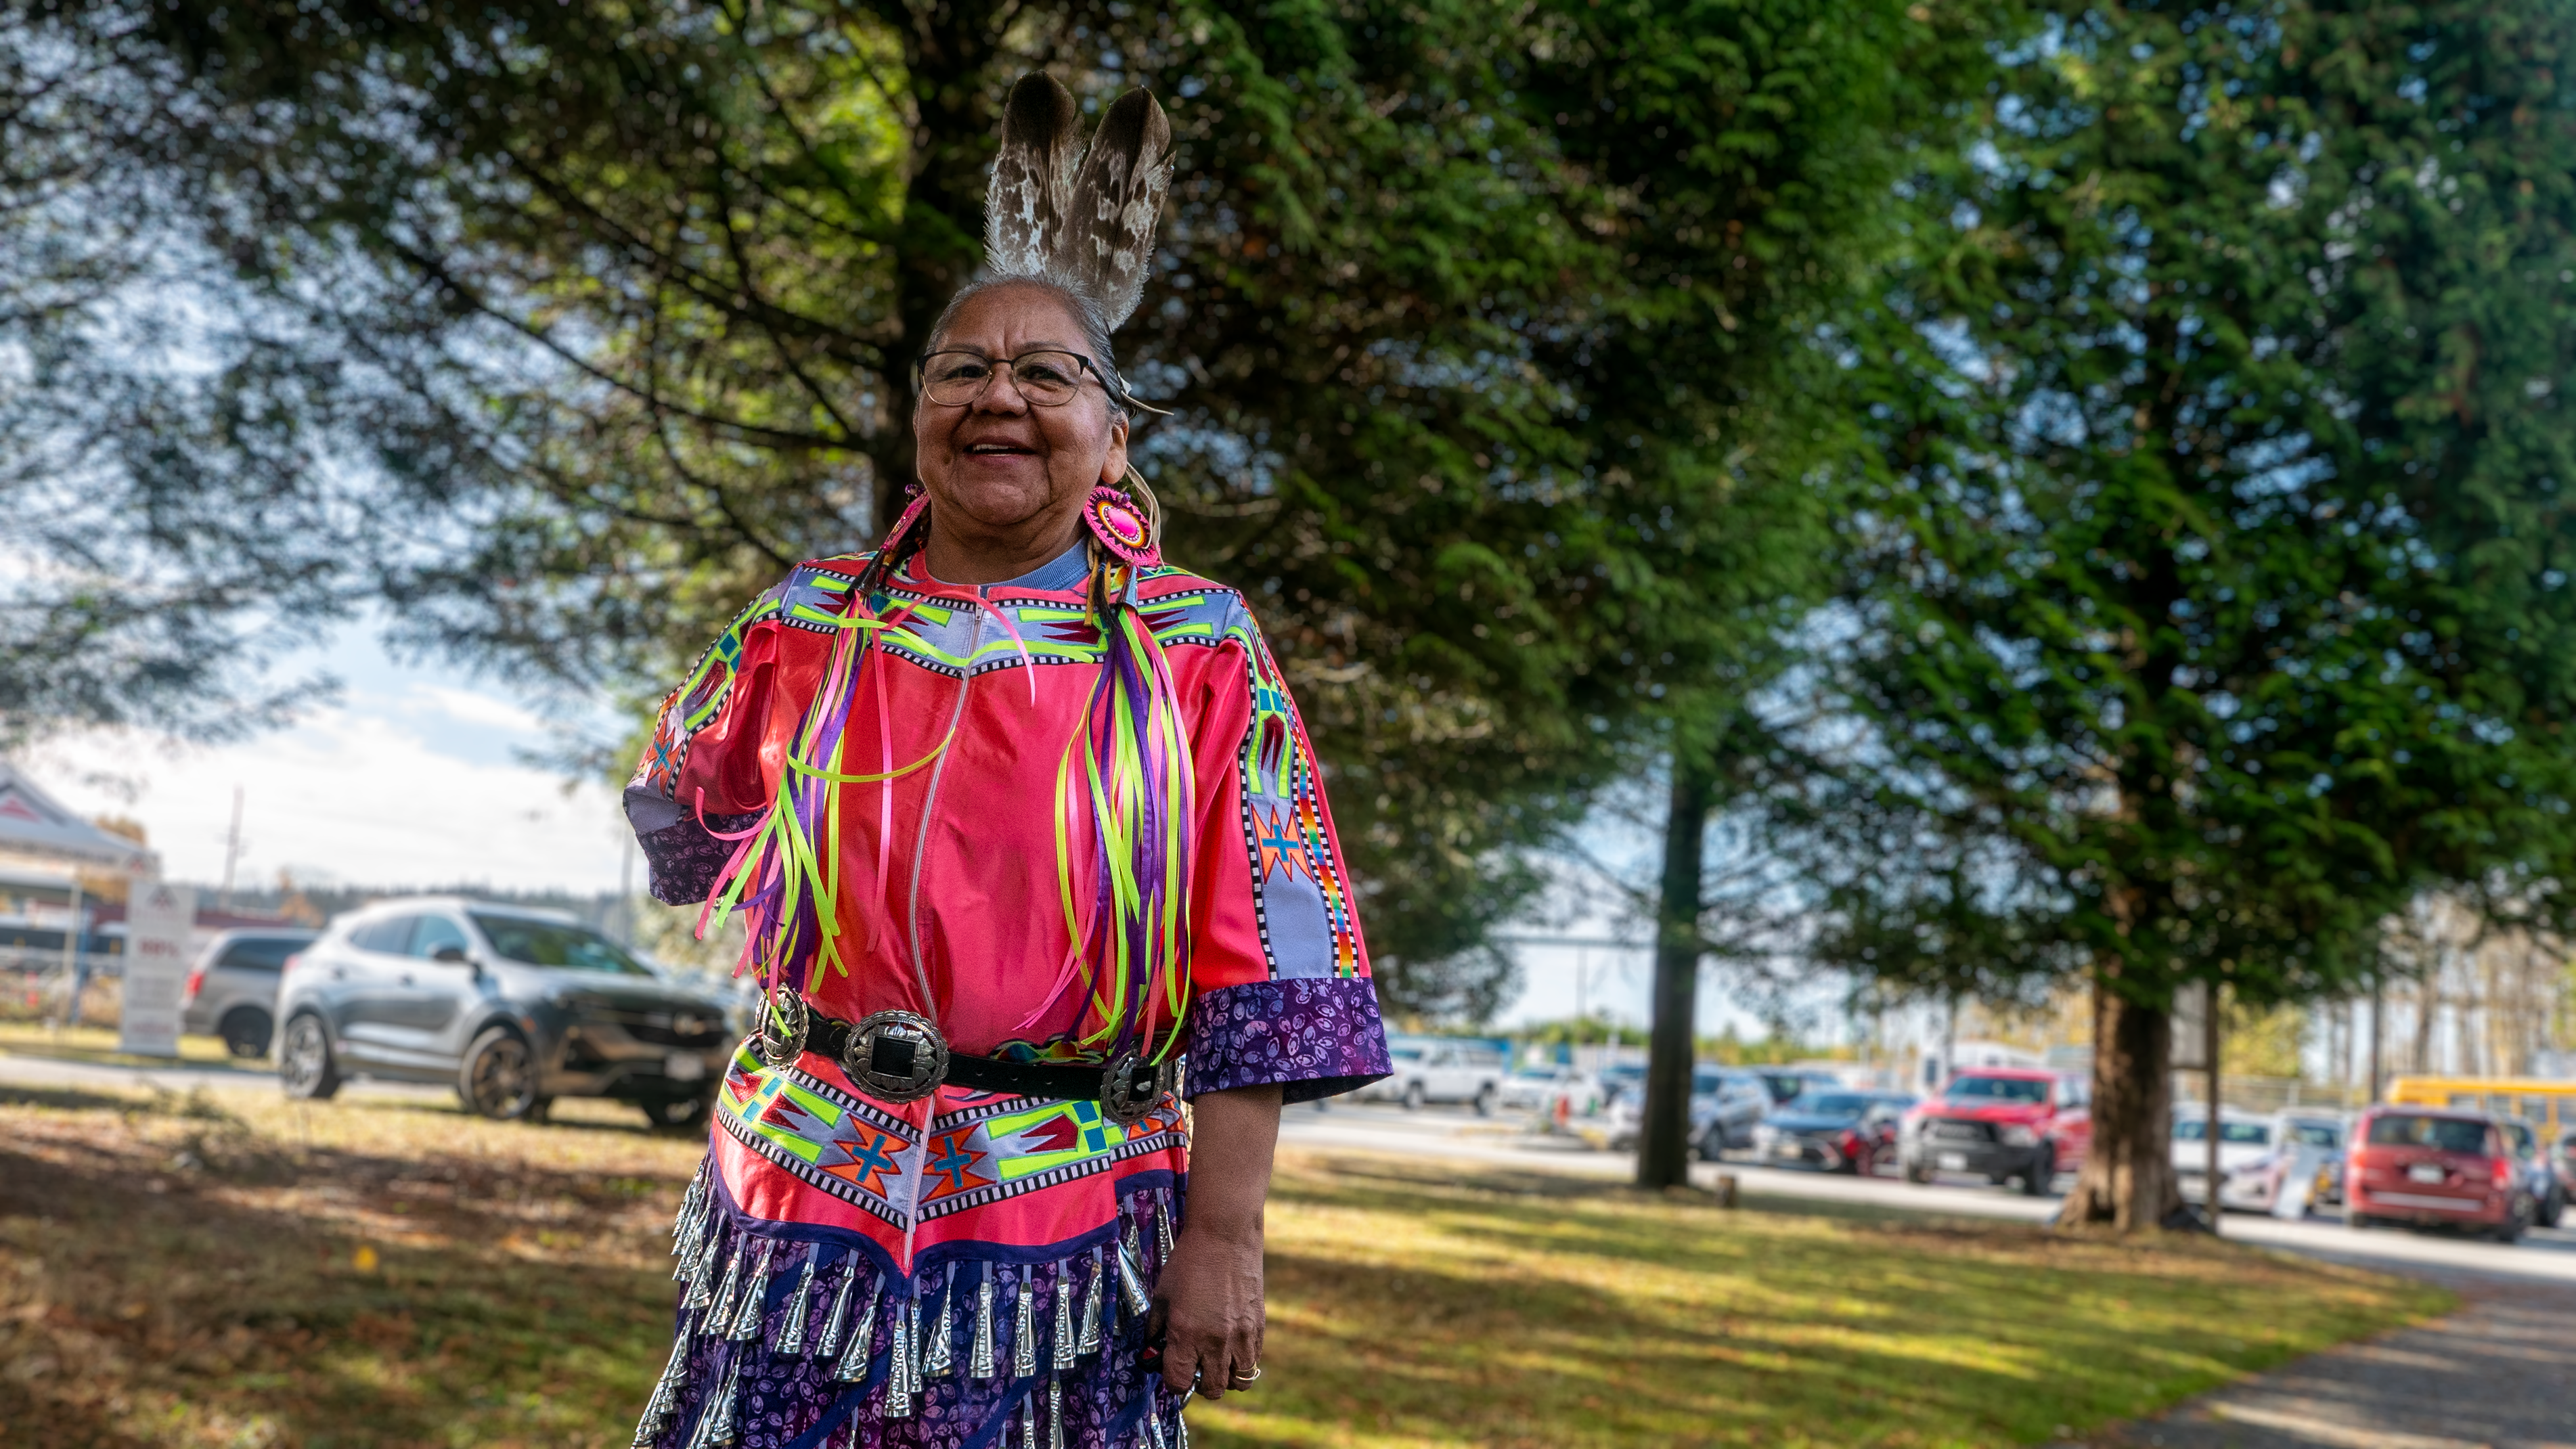 A woman in a multicoloured powwow jingle dress smiles at the camera. She is outdoors in daylight near a parking lot.